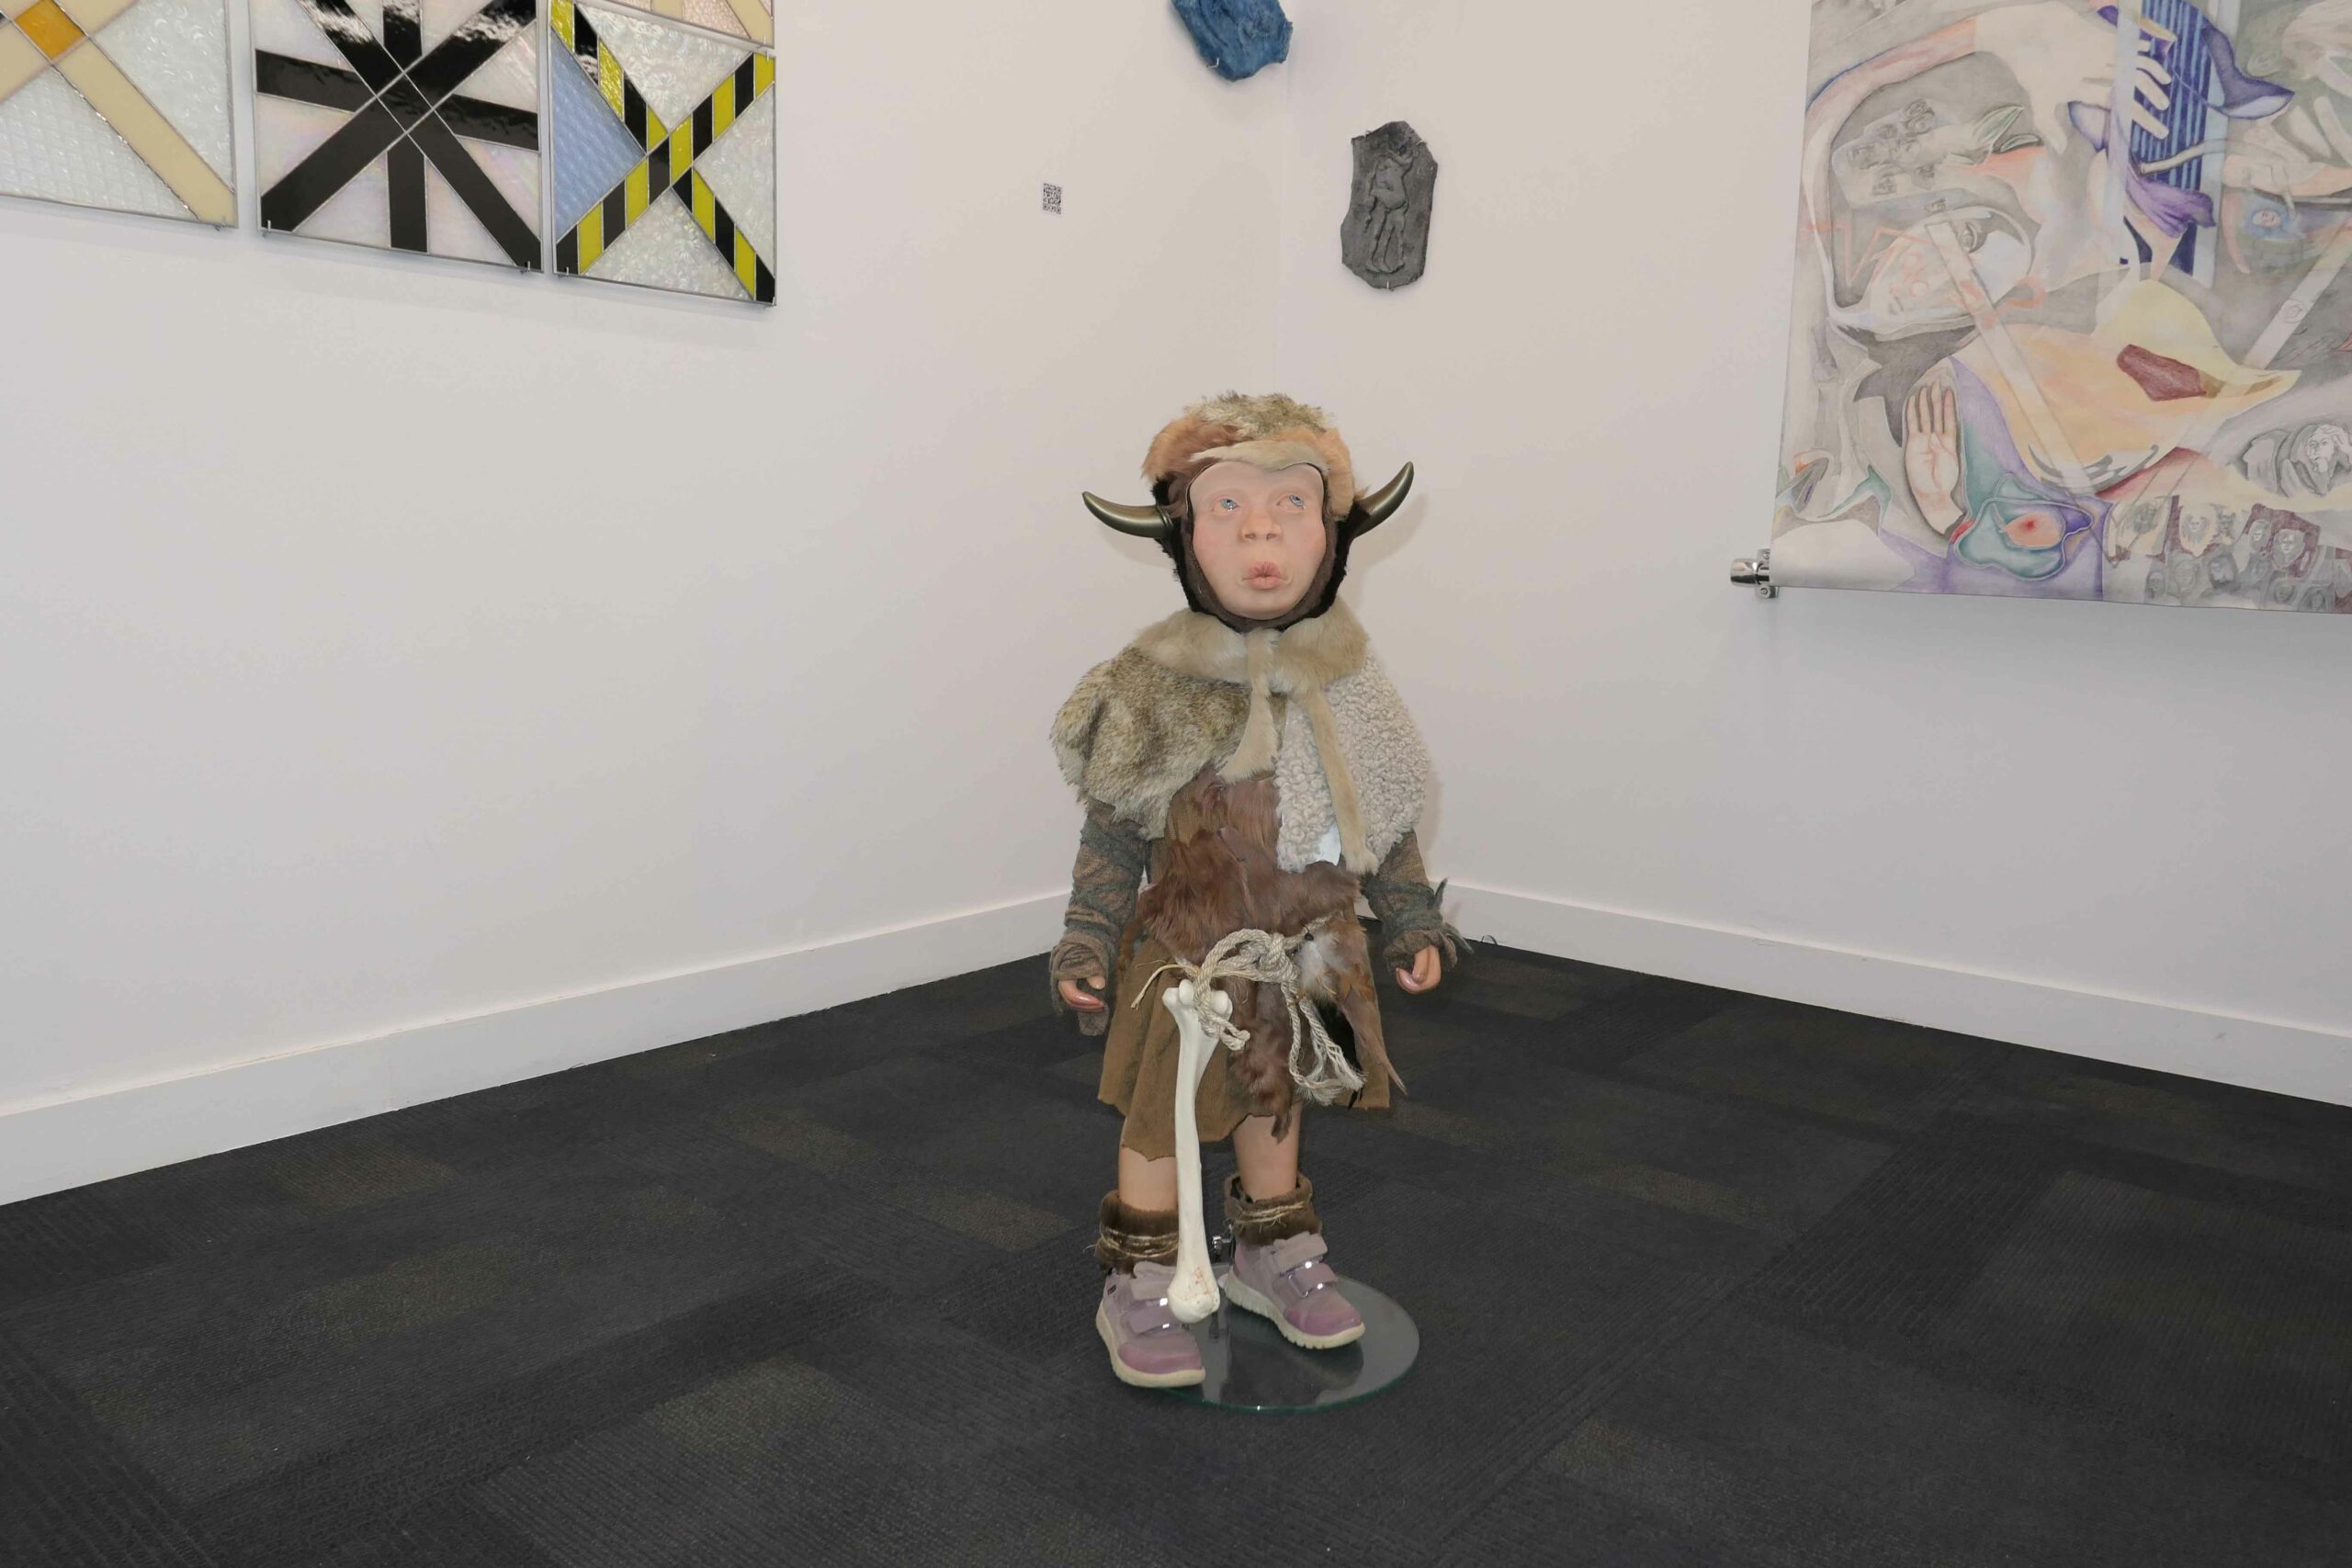 A sculpture of a small figure dressed in furs with a horned helmet stands before abstract paintings on the wall of a gallery.